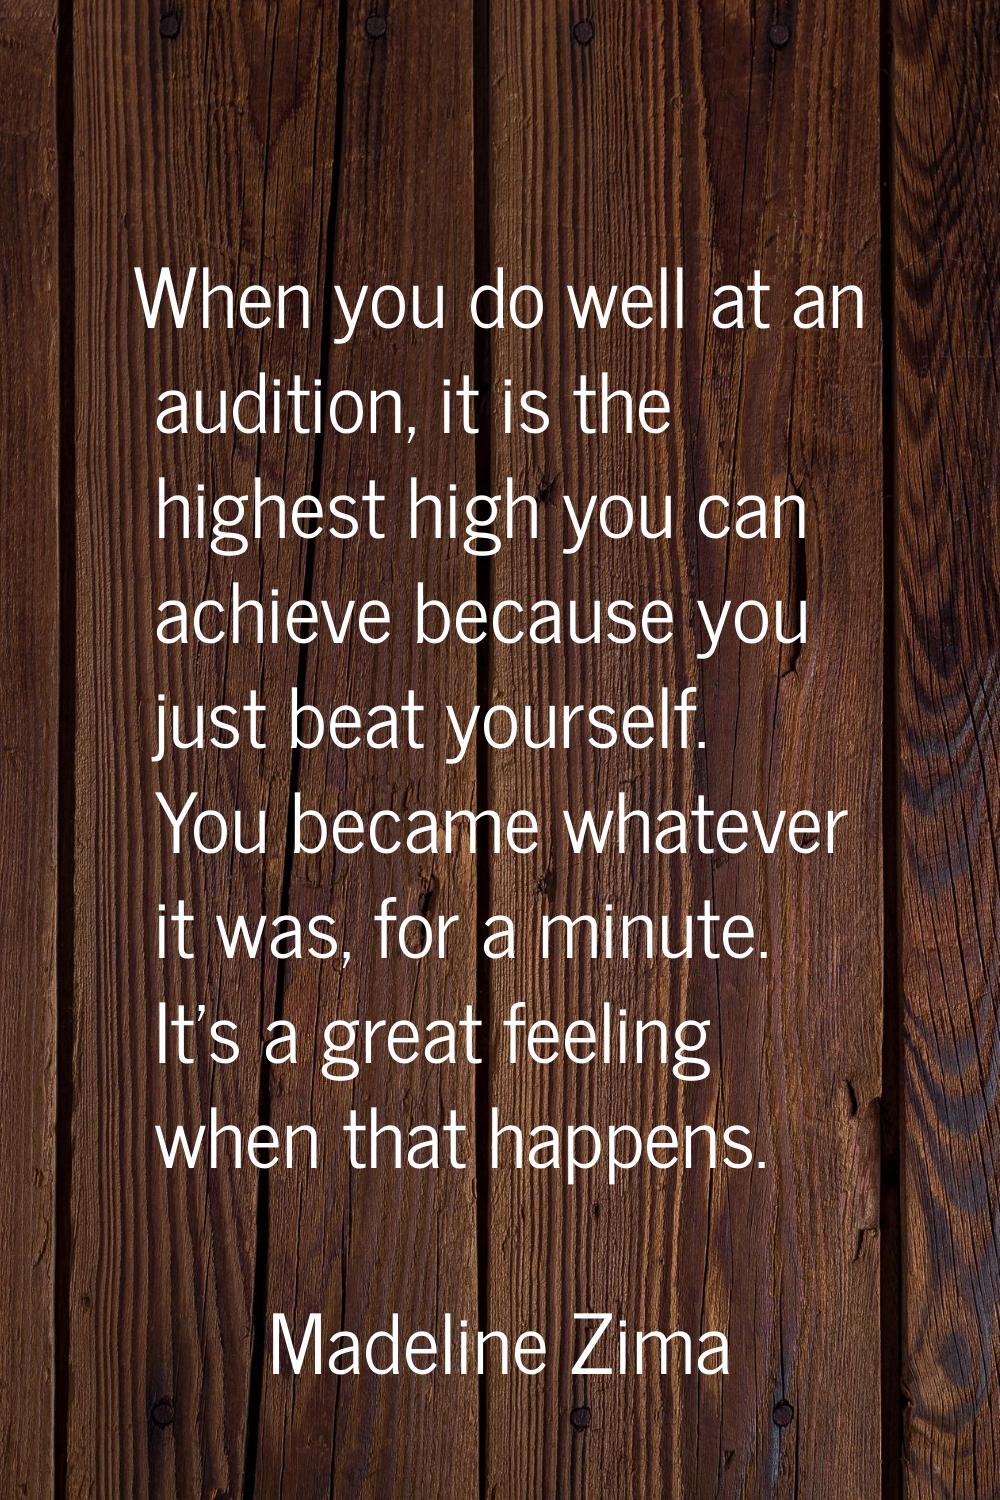 When you do well at an audition, it is the highest high you can achieve because you just beat yours